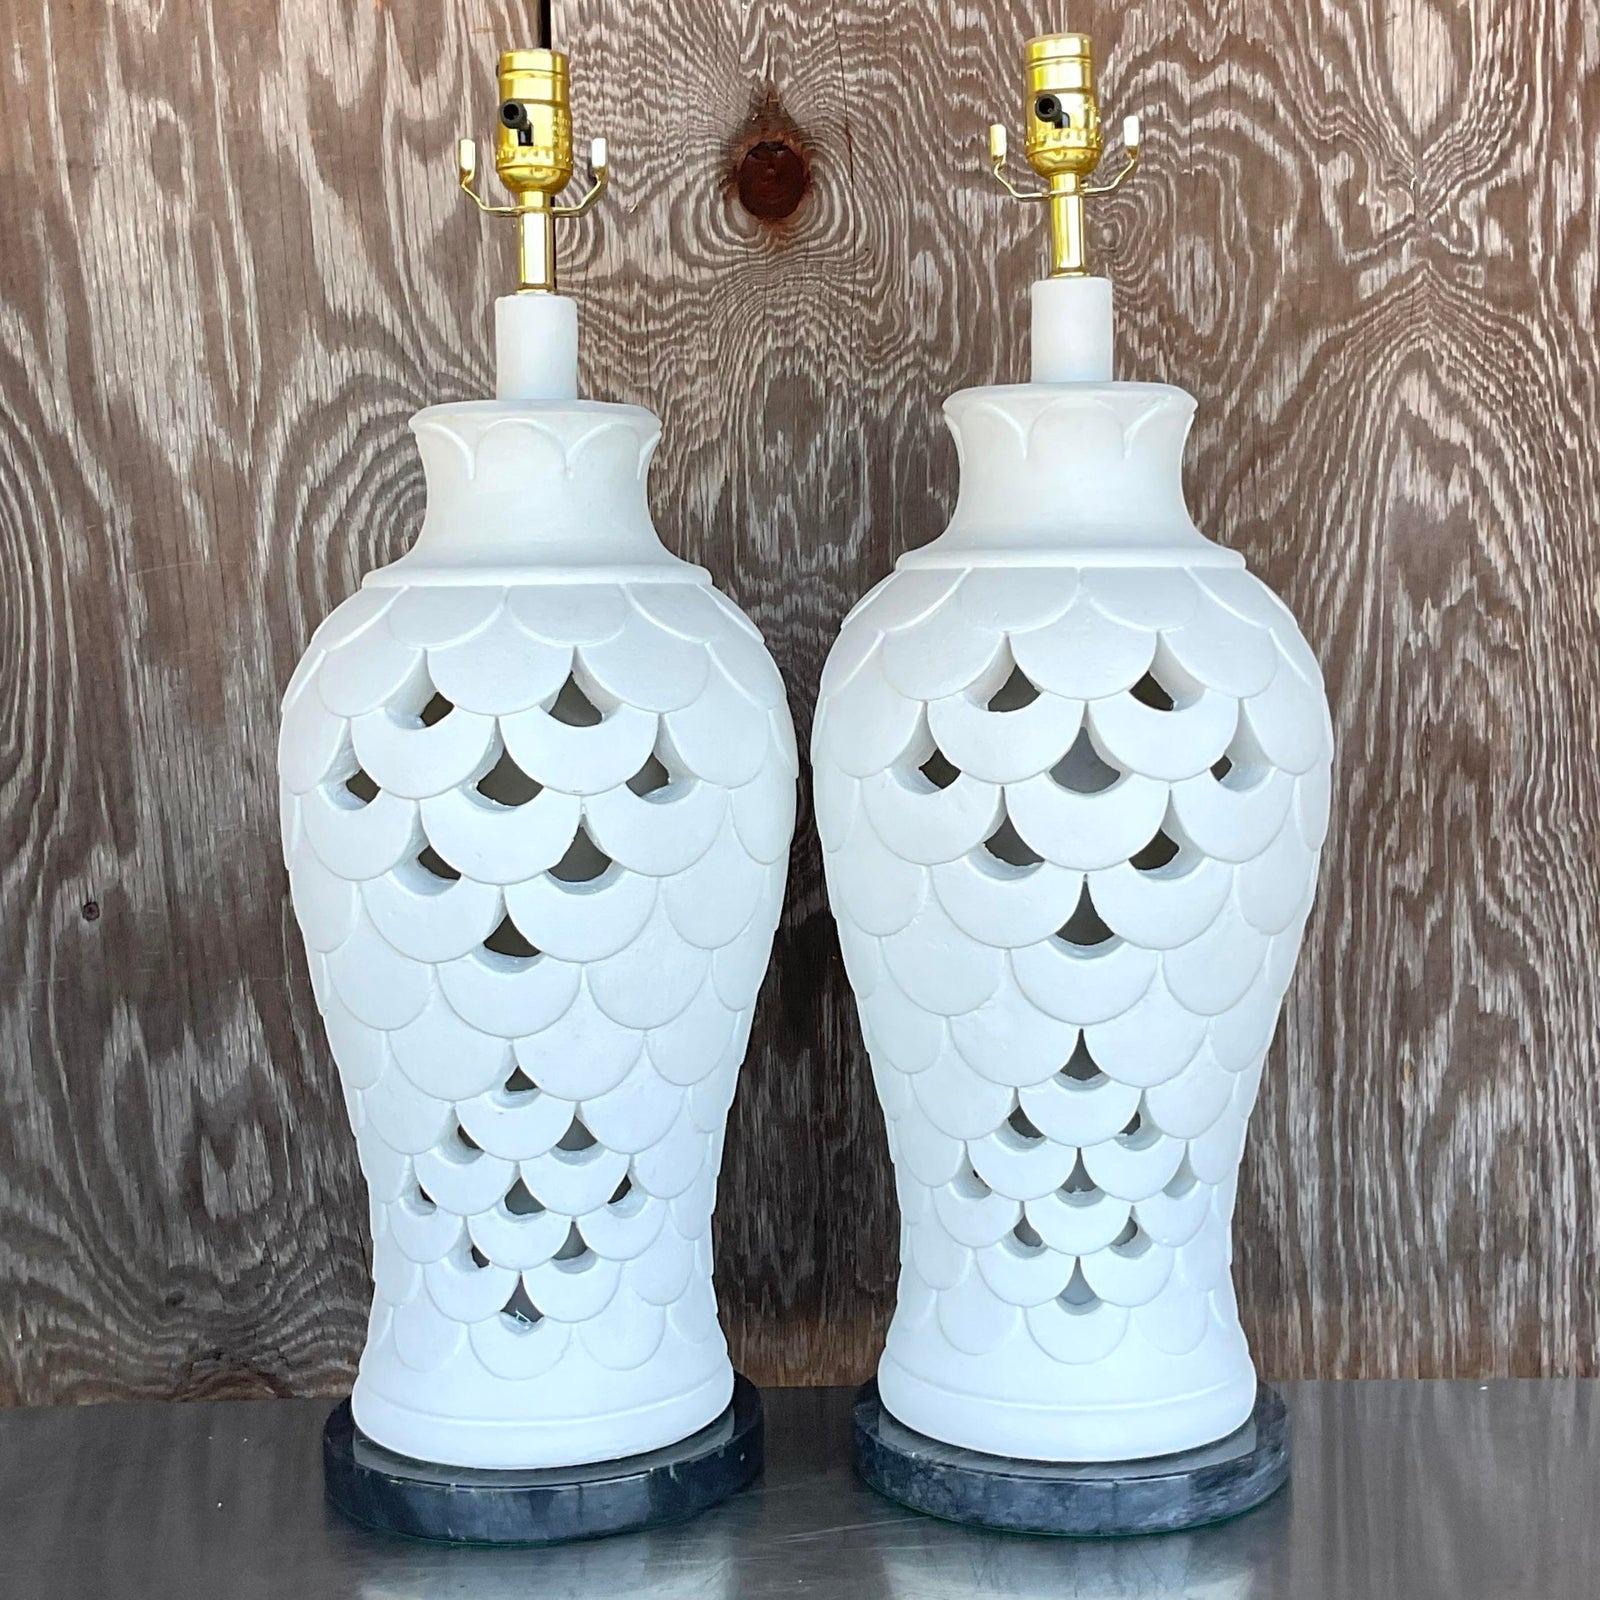 North American Vintage Boho Plaster Lamps - a Pair For Sale